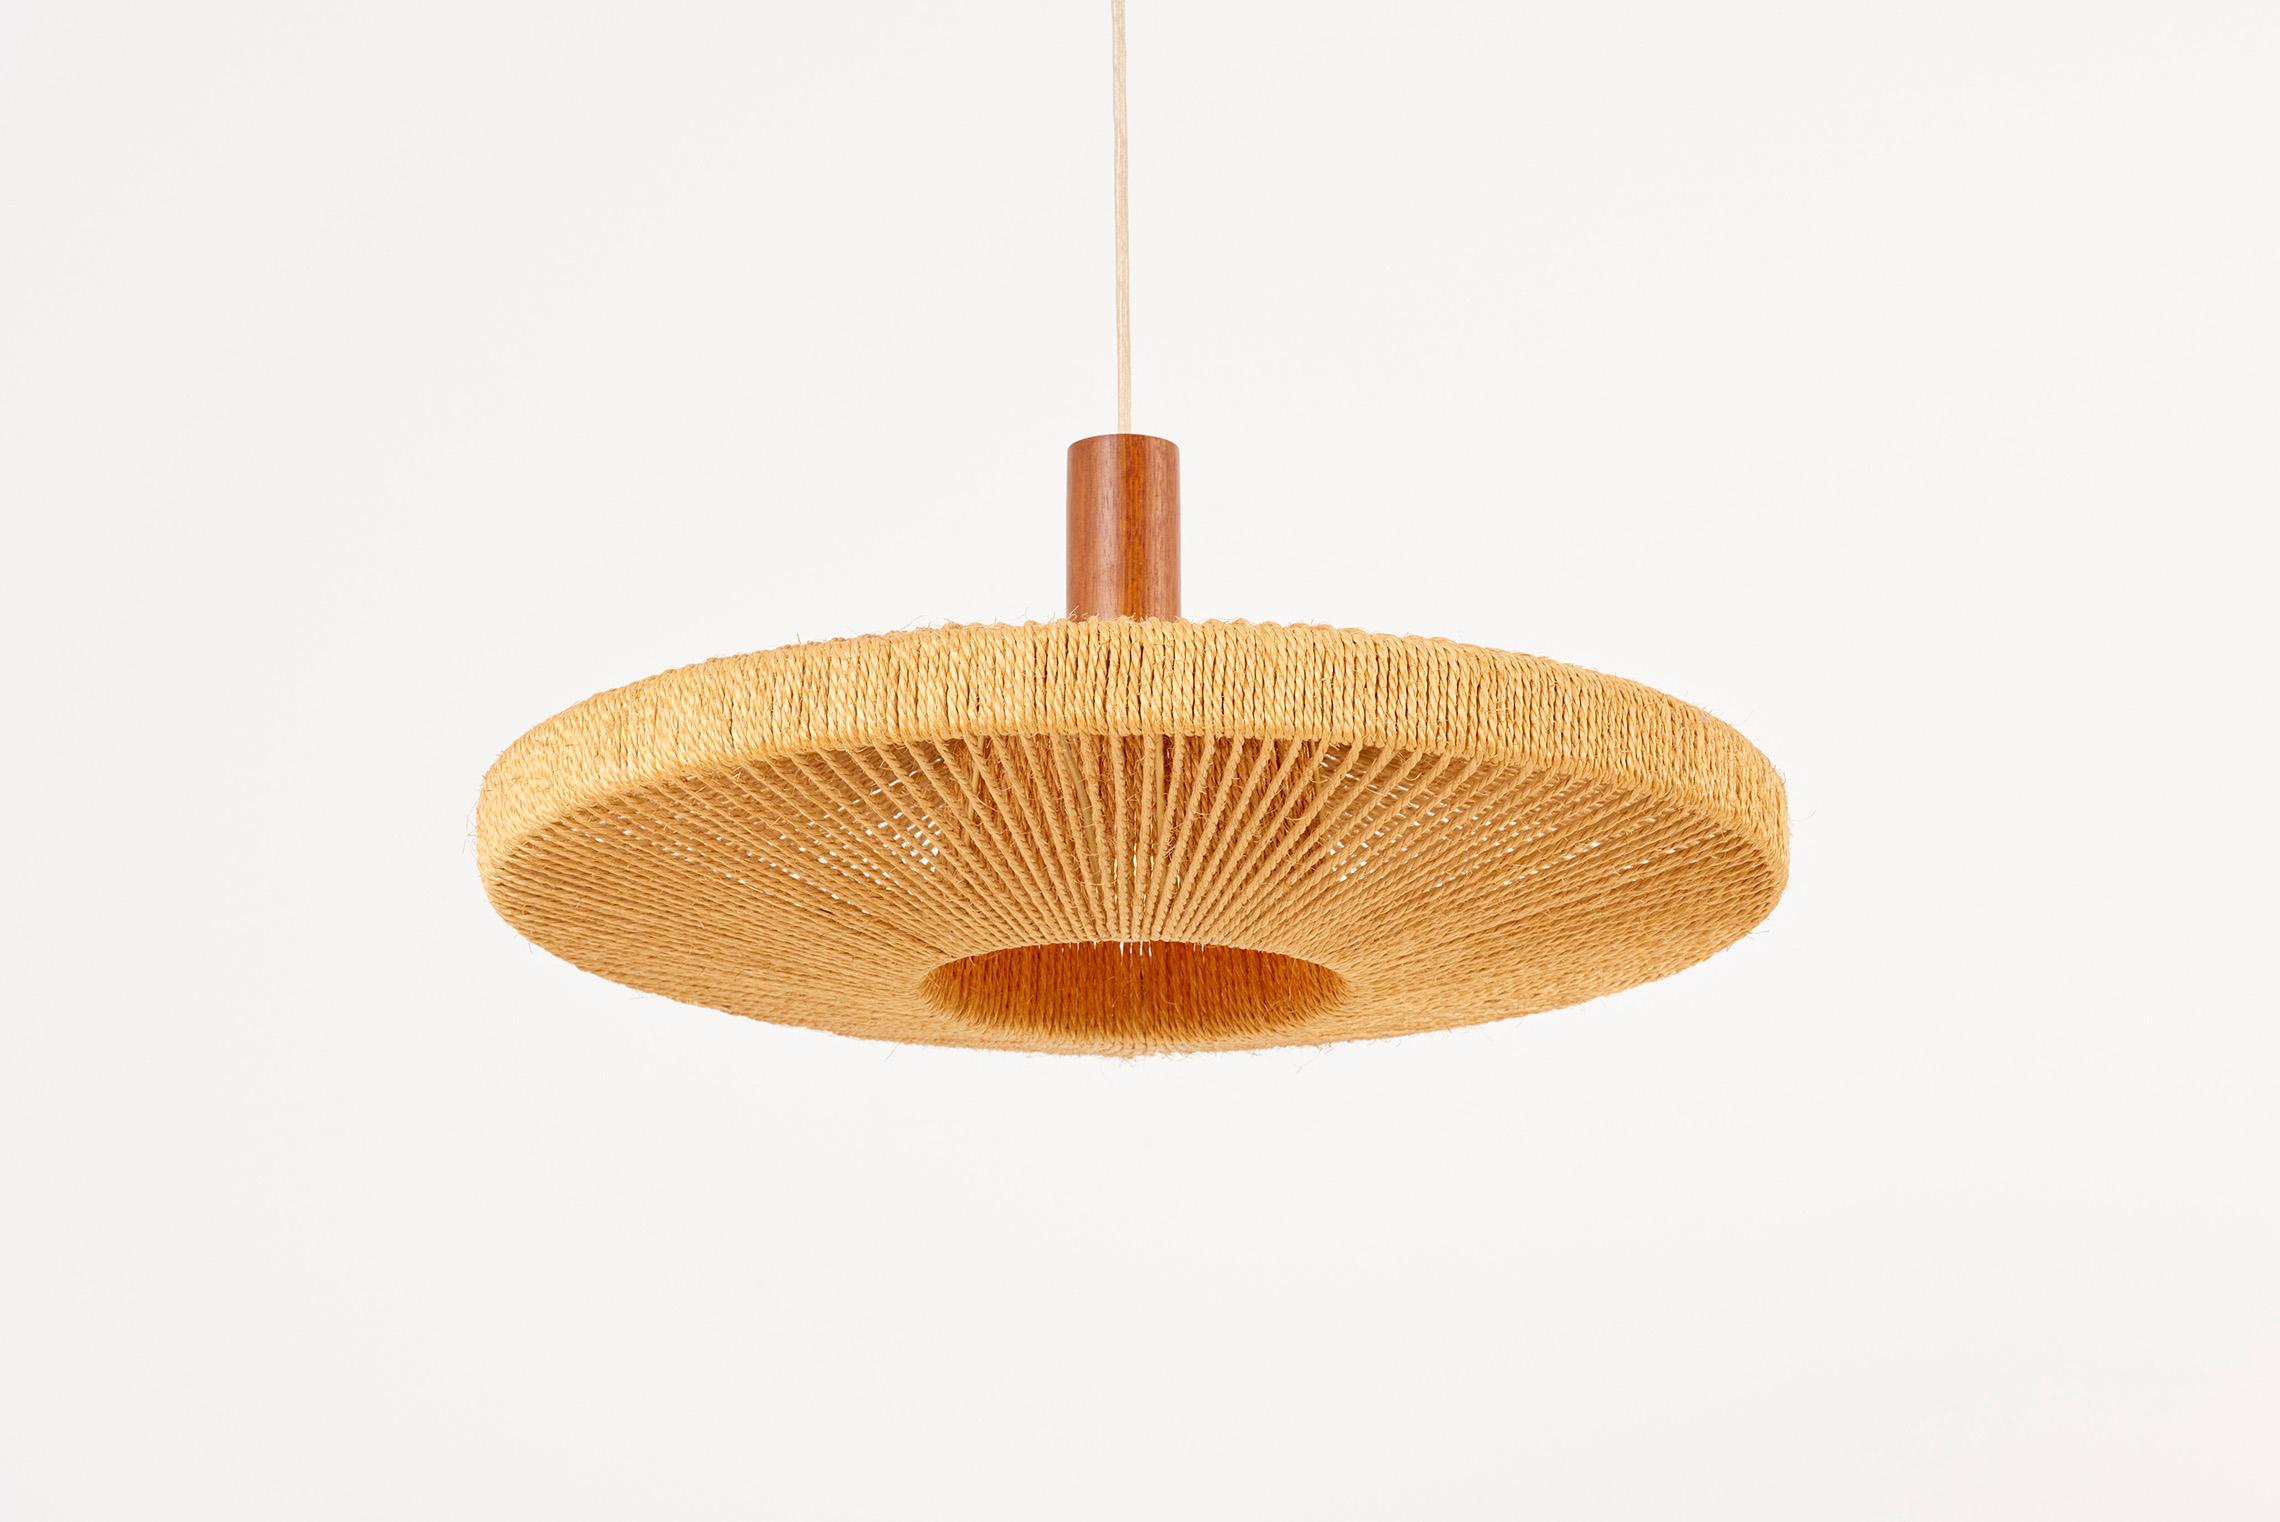 Large Temde Leuchten Sisal pendant lamp, Swiz, 1950s
Round pendant lamp with cord shade manufactured by Swiz / German Manufacturer Temde Leuchten. The measurements given for the height apply to the height of the shade. 1x Model A / E27